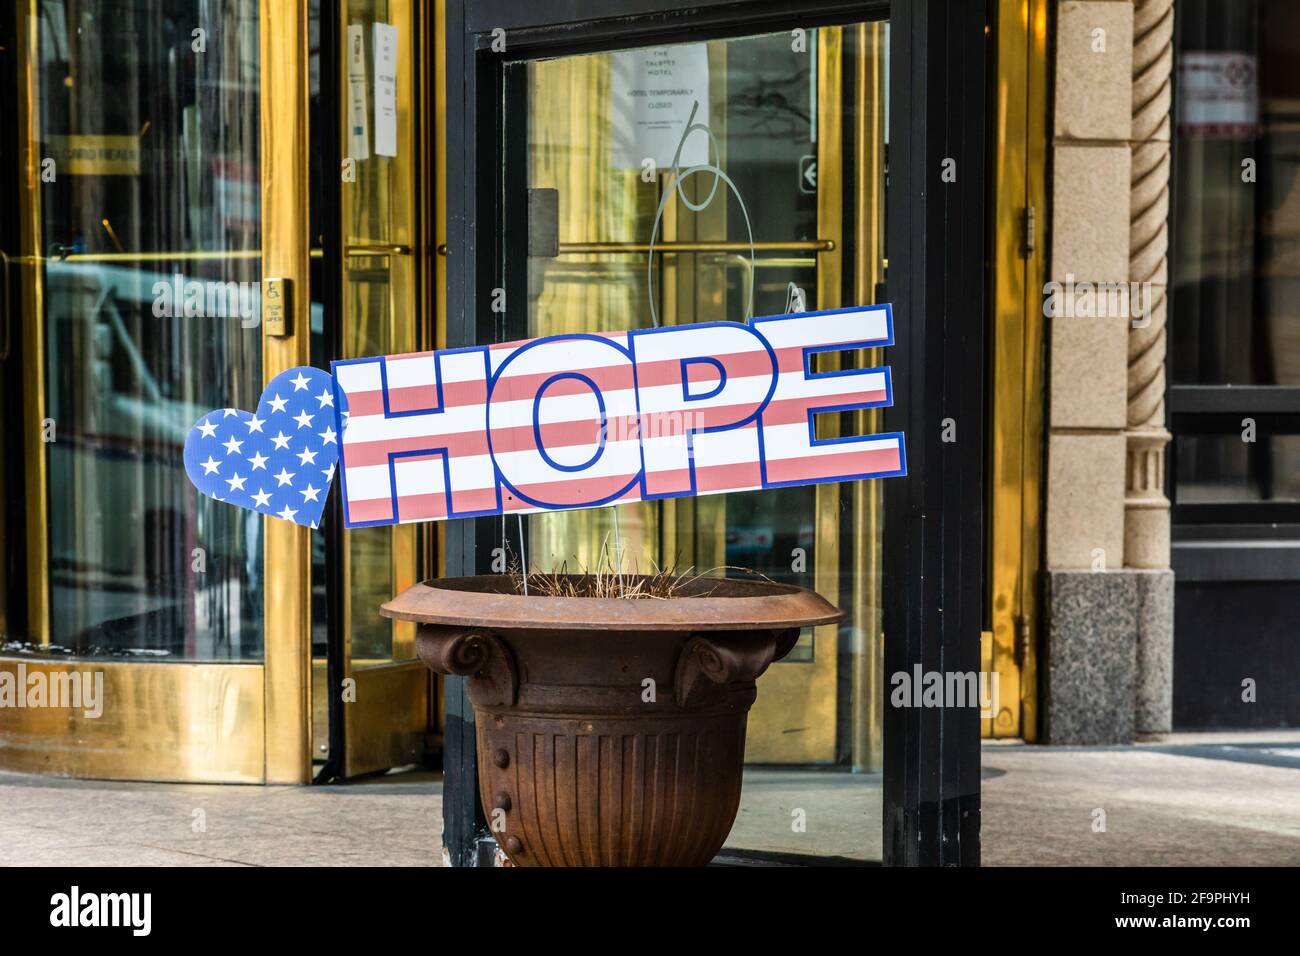 The word Hope with a US Flag background, written on cardboard board being displayed in a city sidewalk planter. Stock Photo